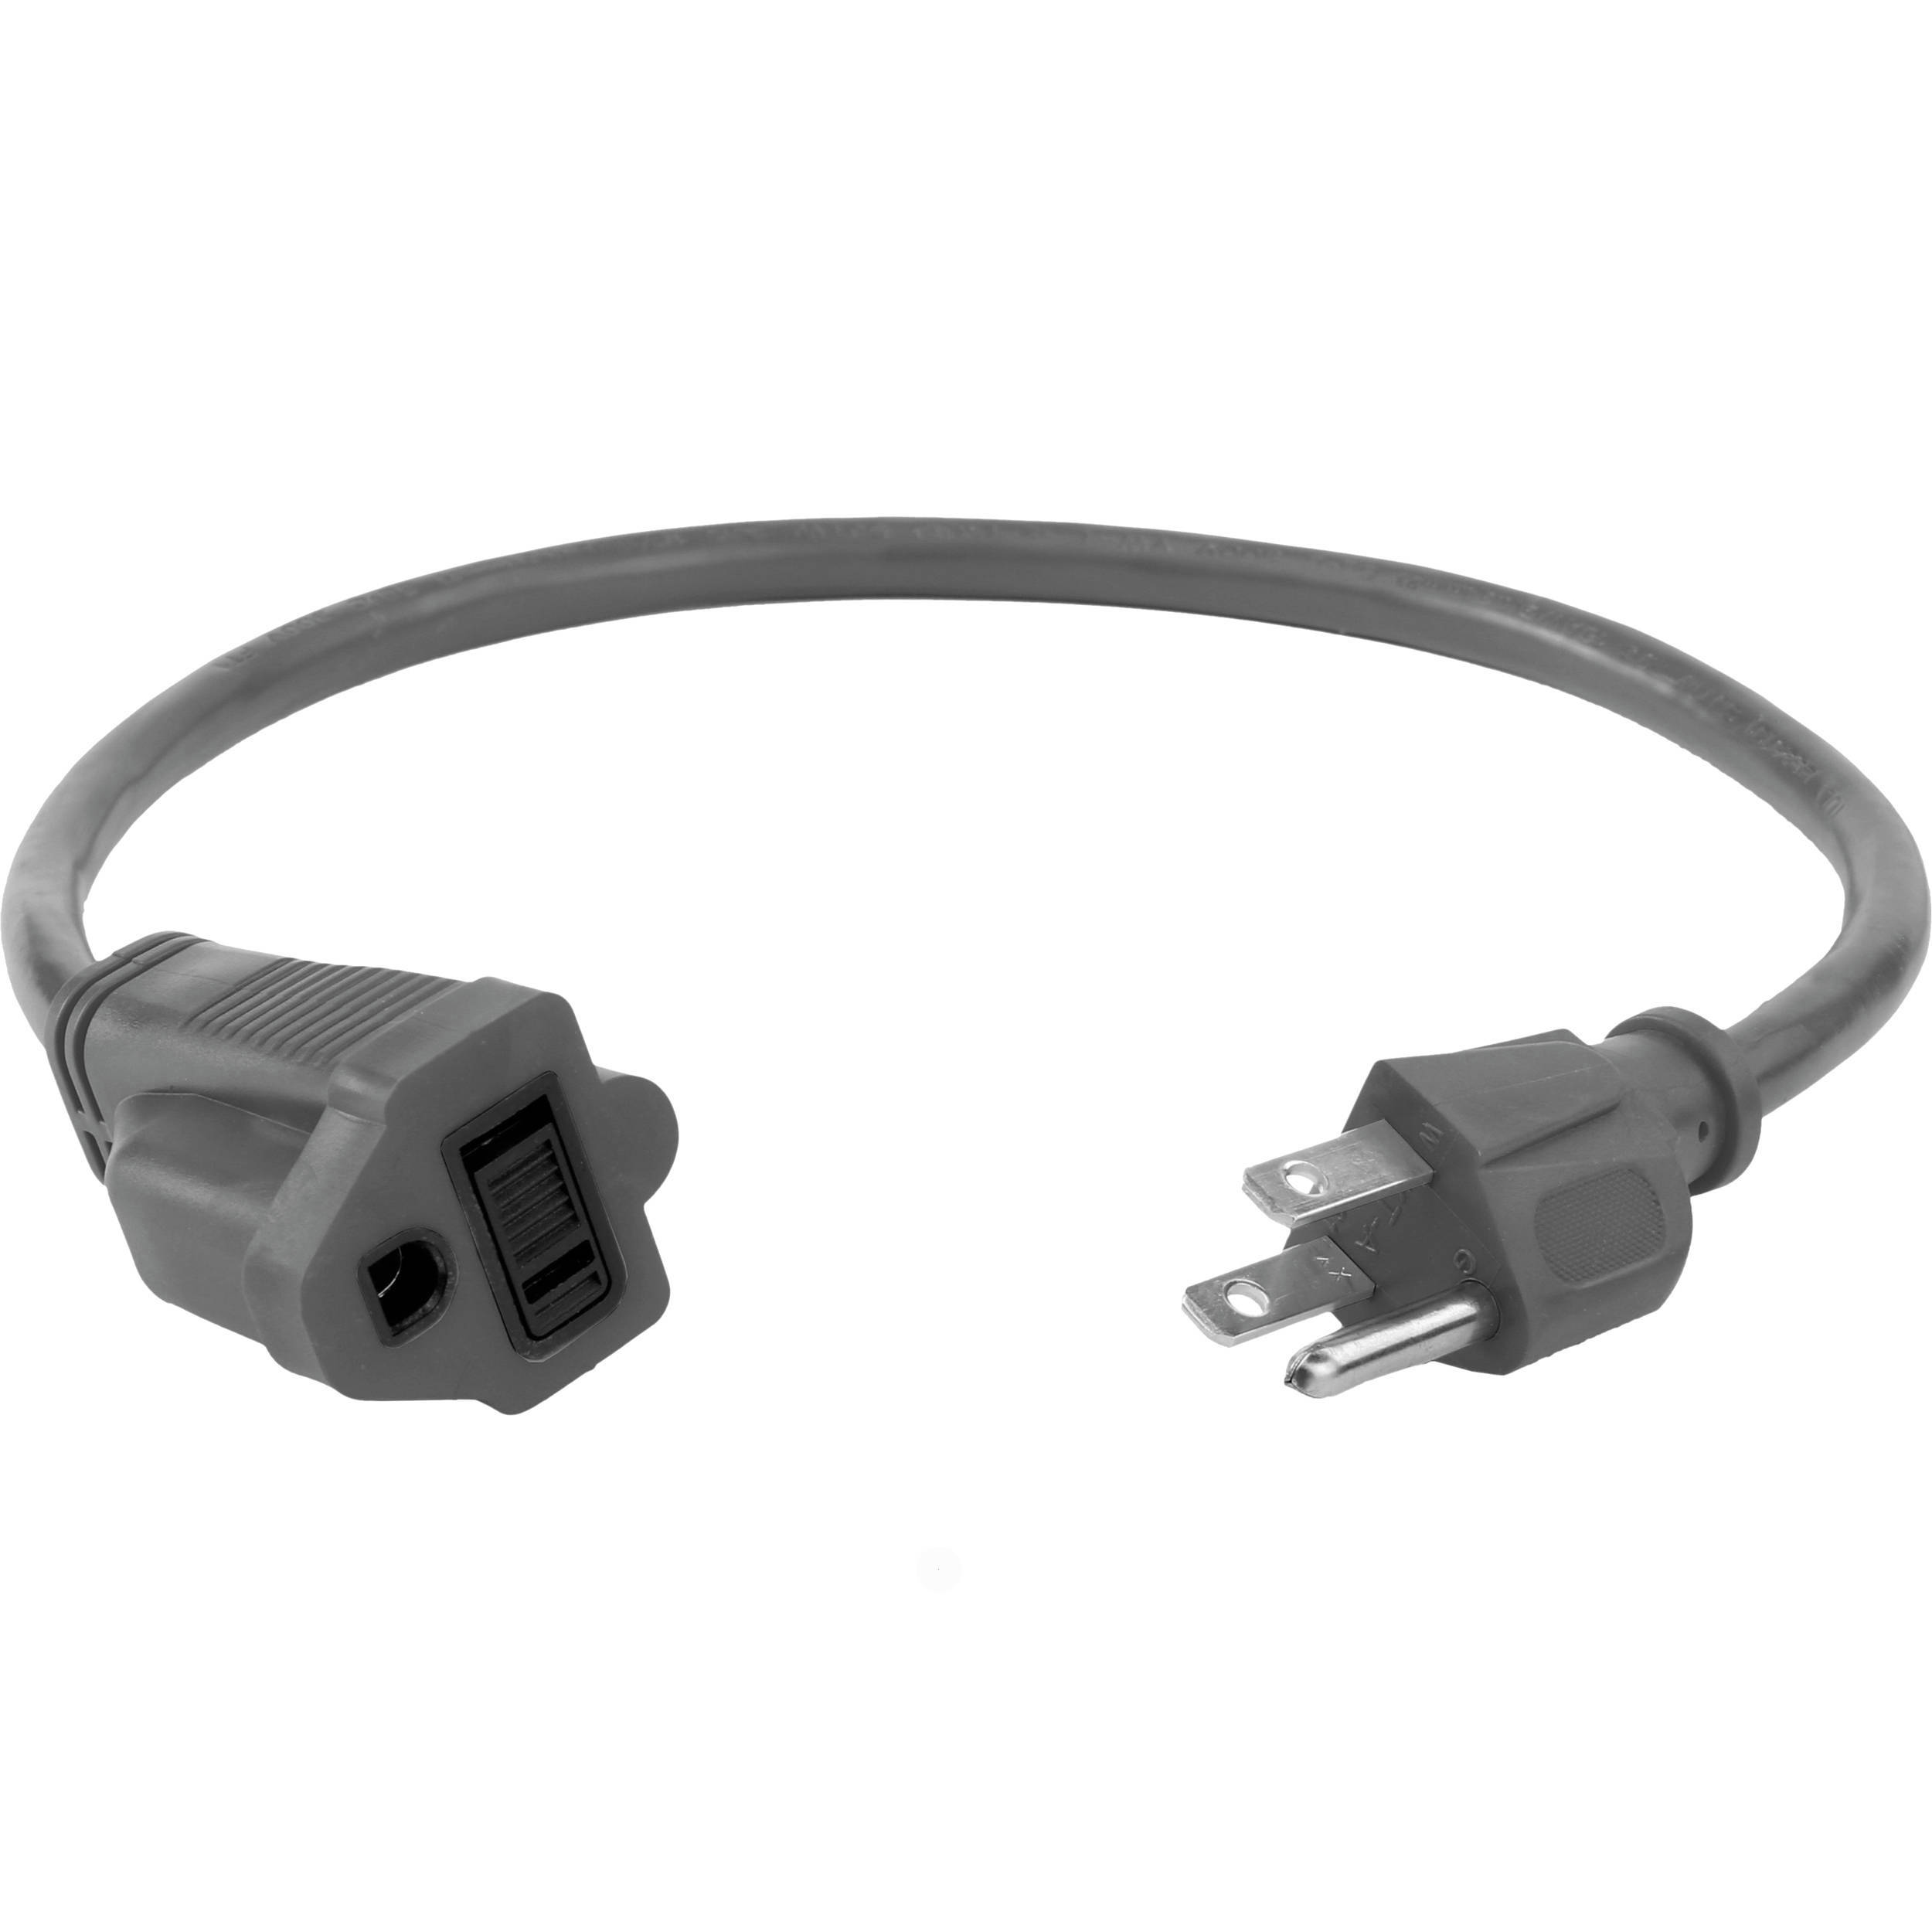 Watson 1.5 ft AC Power Extension Cord 16 AWG (Gray) ACE16-1.5G